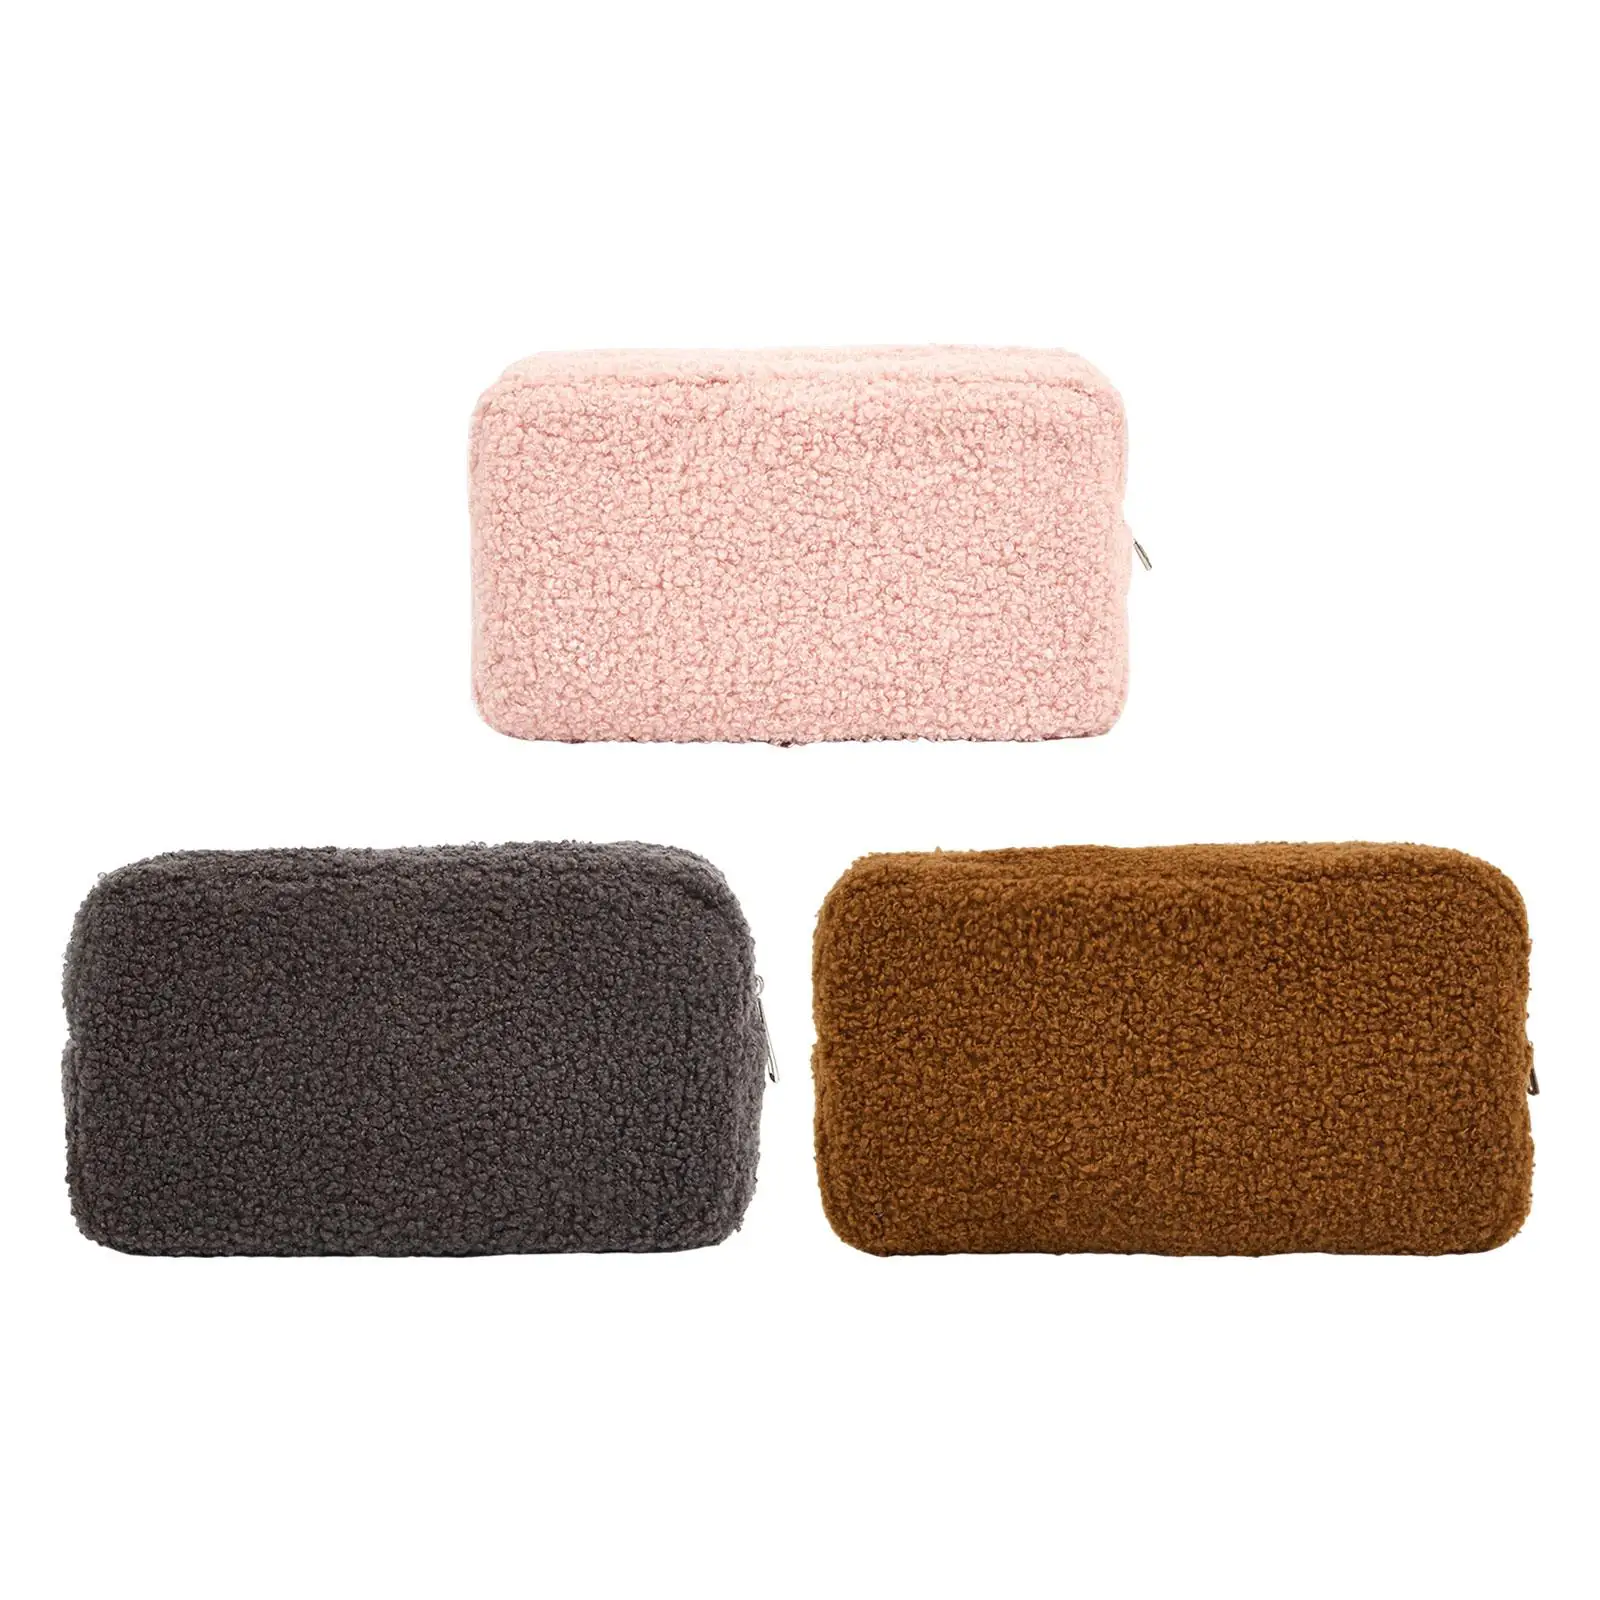 Cosmetic Storage Bag Plush Fabric Multifunctional Durable Cosmetic Pouch for Toiletries Cosmetics Traveling Business Trip Girls